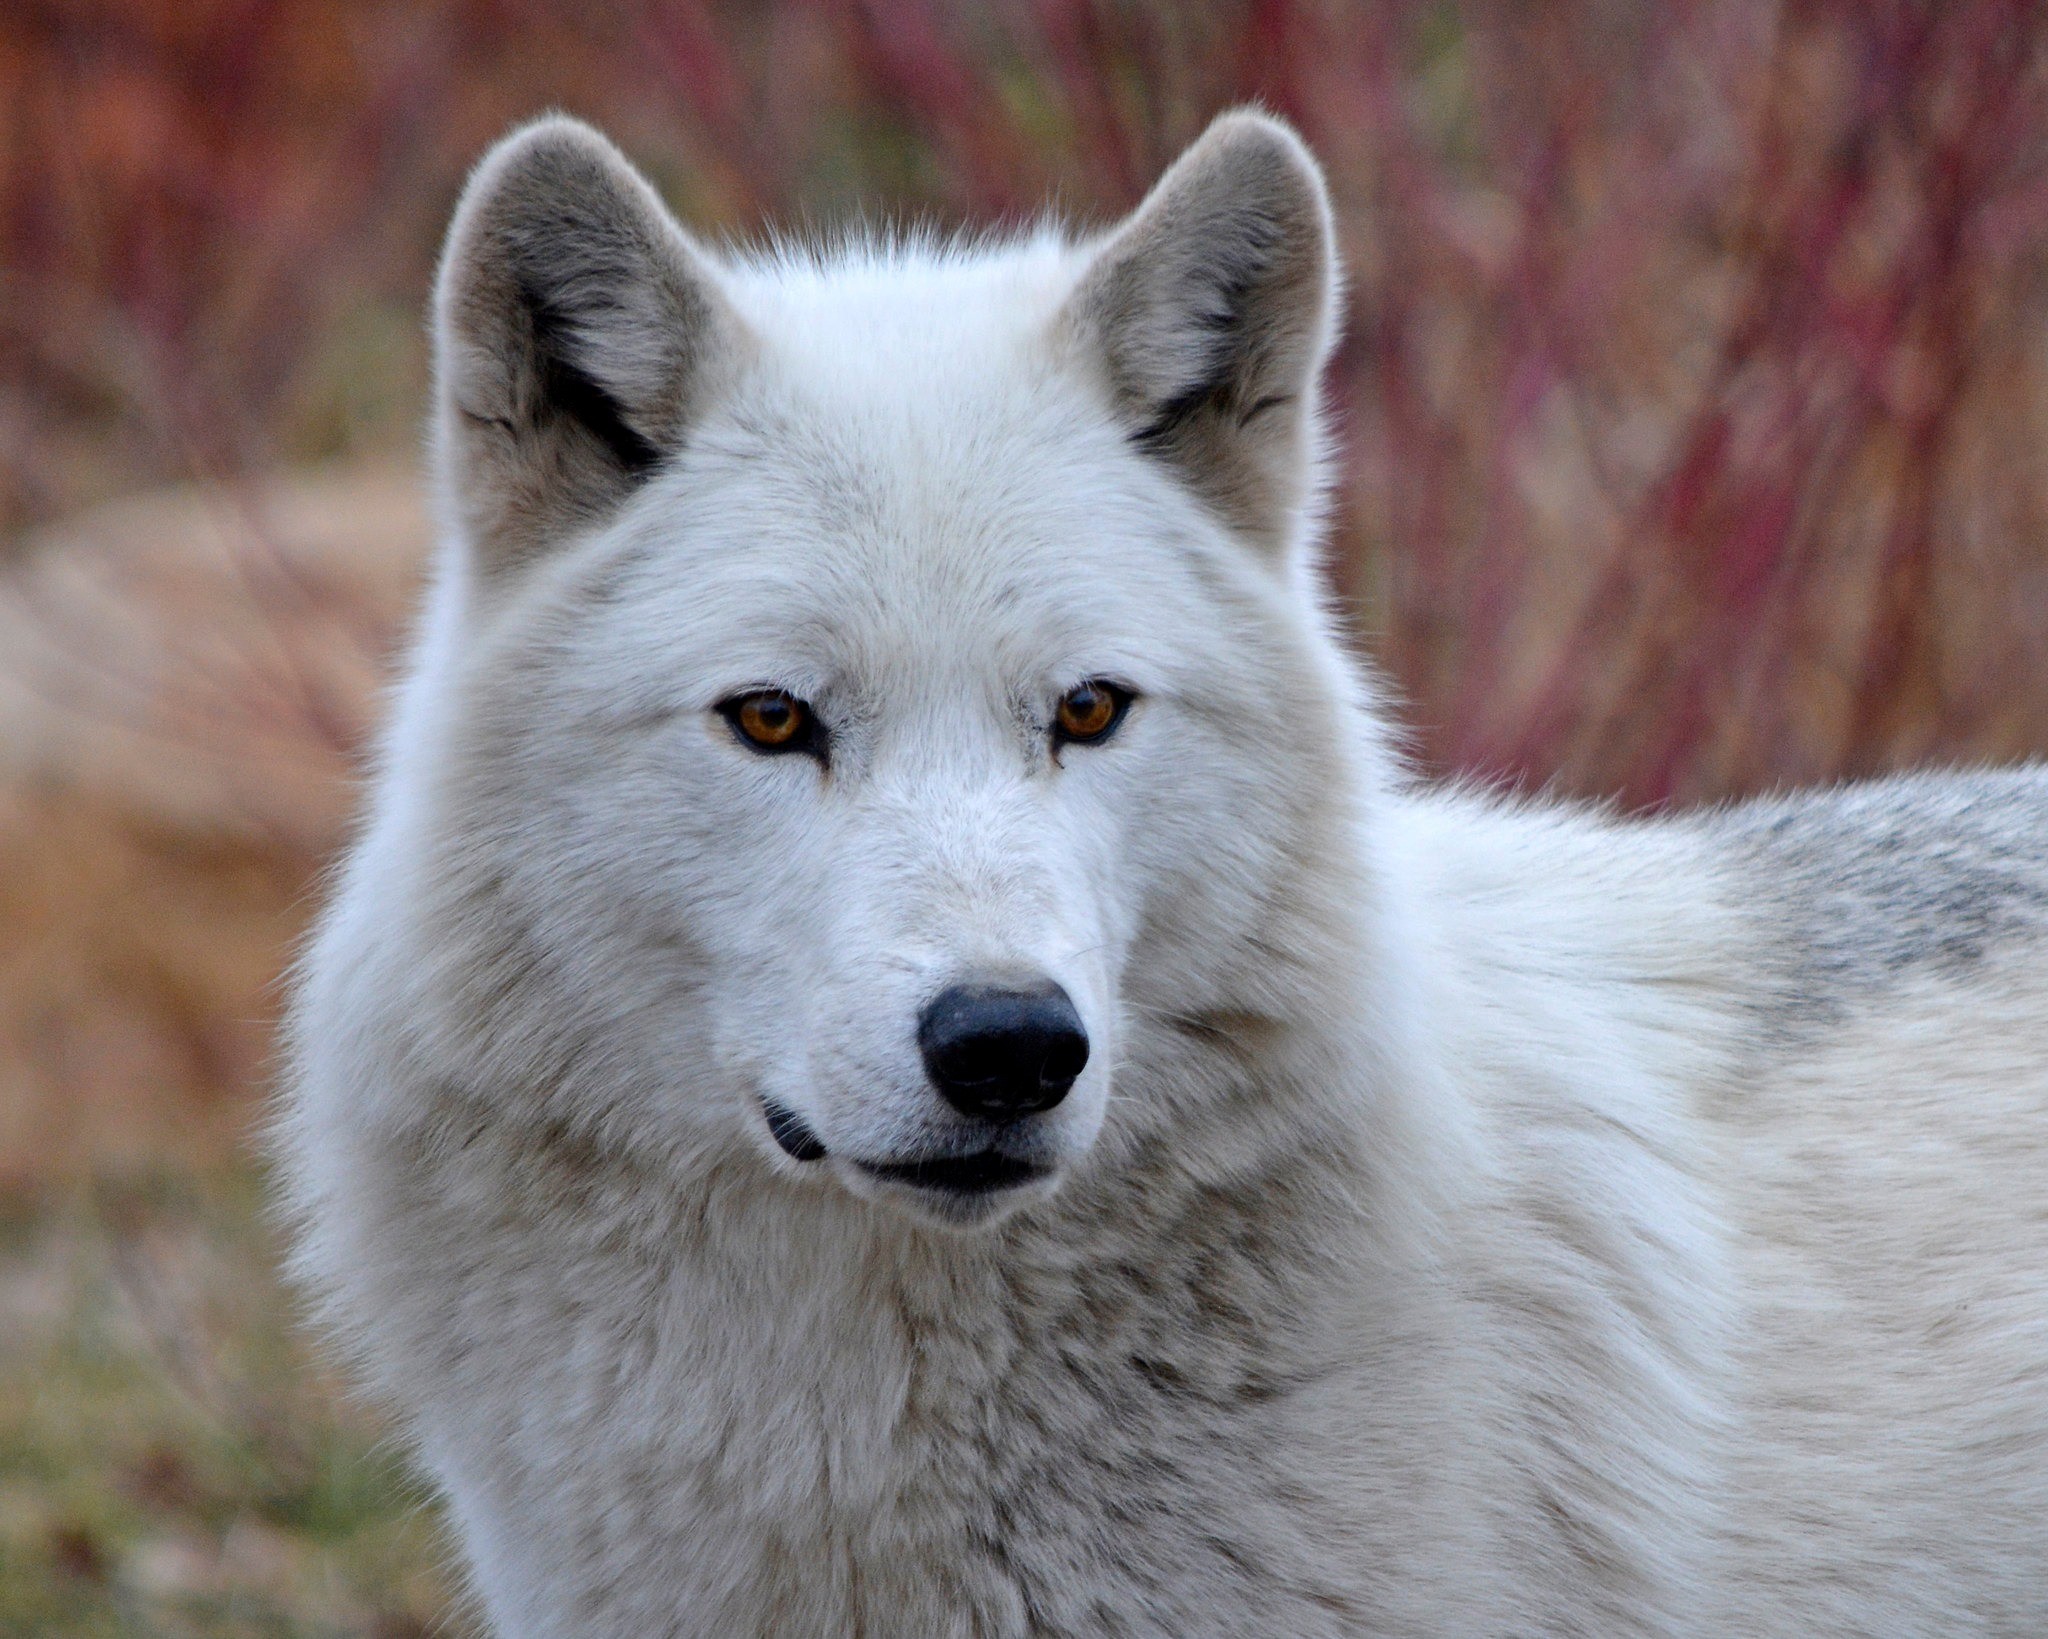 Detroit Zoo says goodbye to beloved gray wolf, Wazi: ‘We are heartbroken’